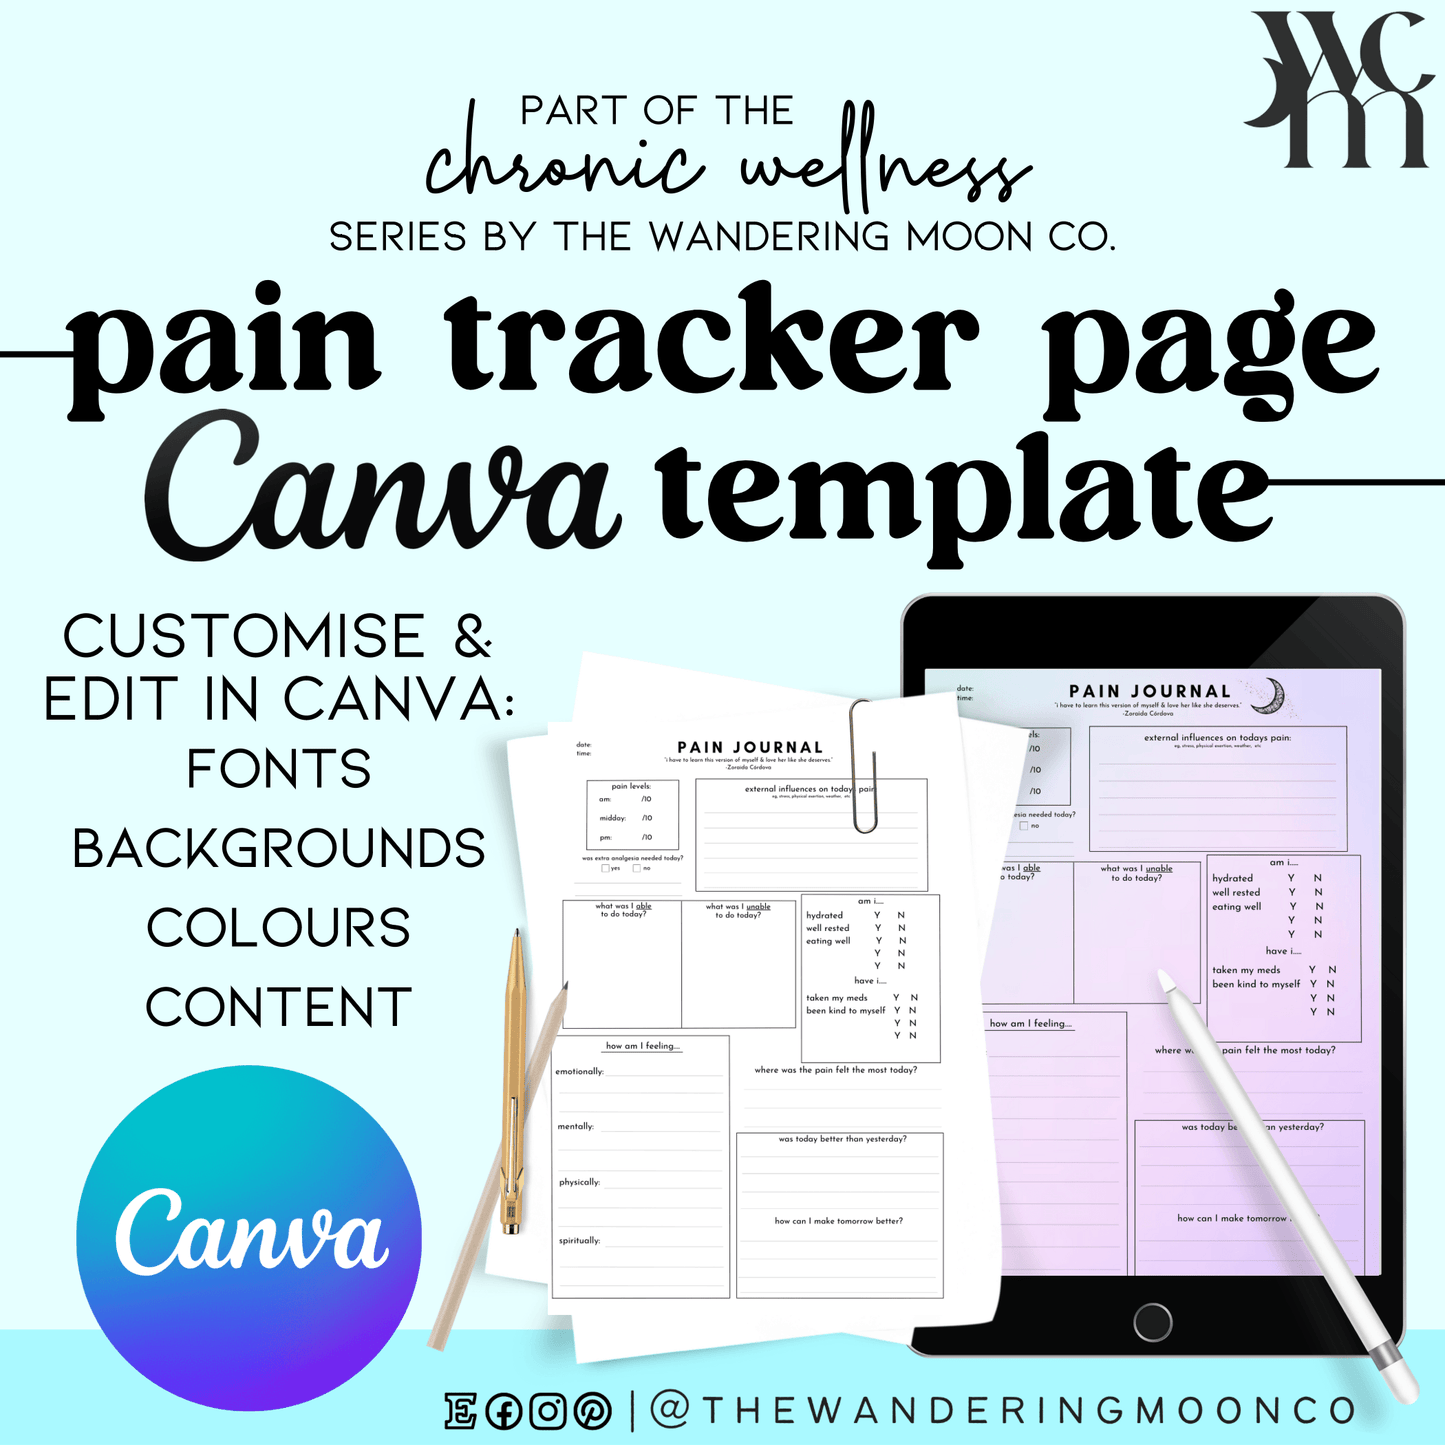 pain tracker journal page canva template | spoonie chronic pain illness | fibro endo - The Wandering Moon Co.